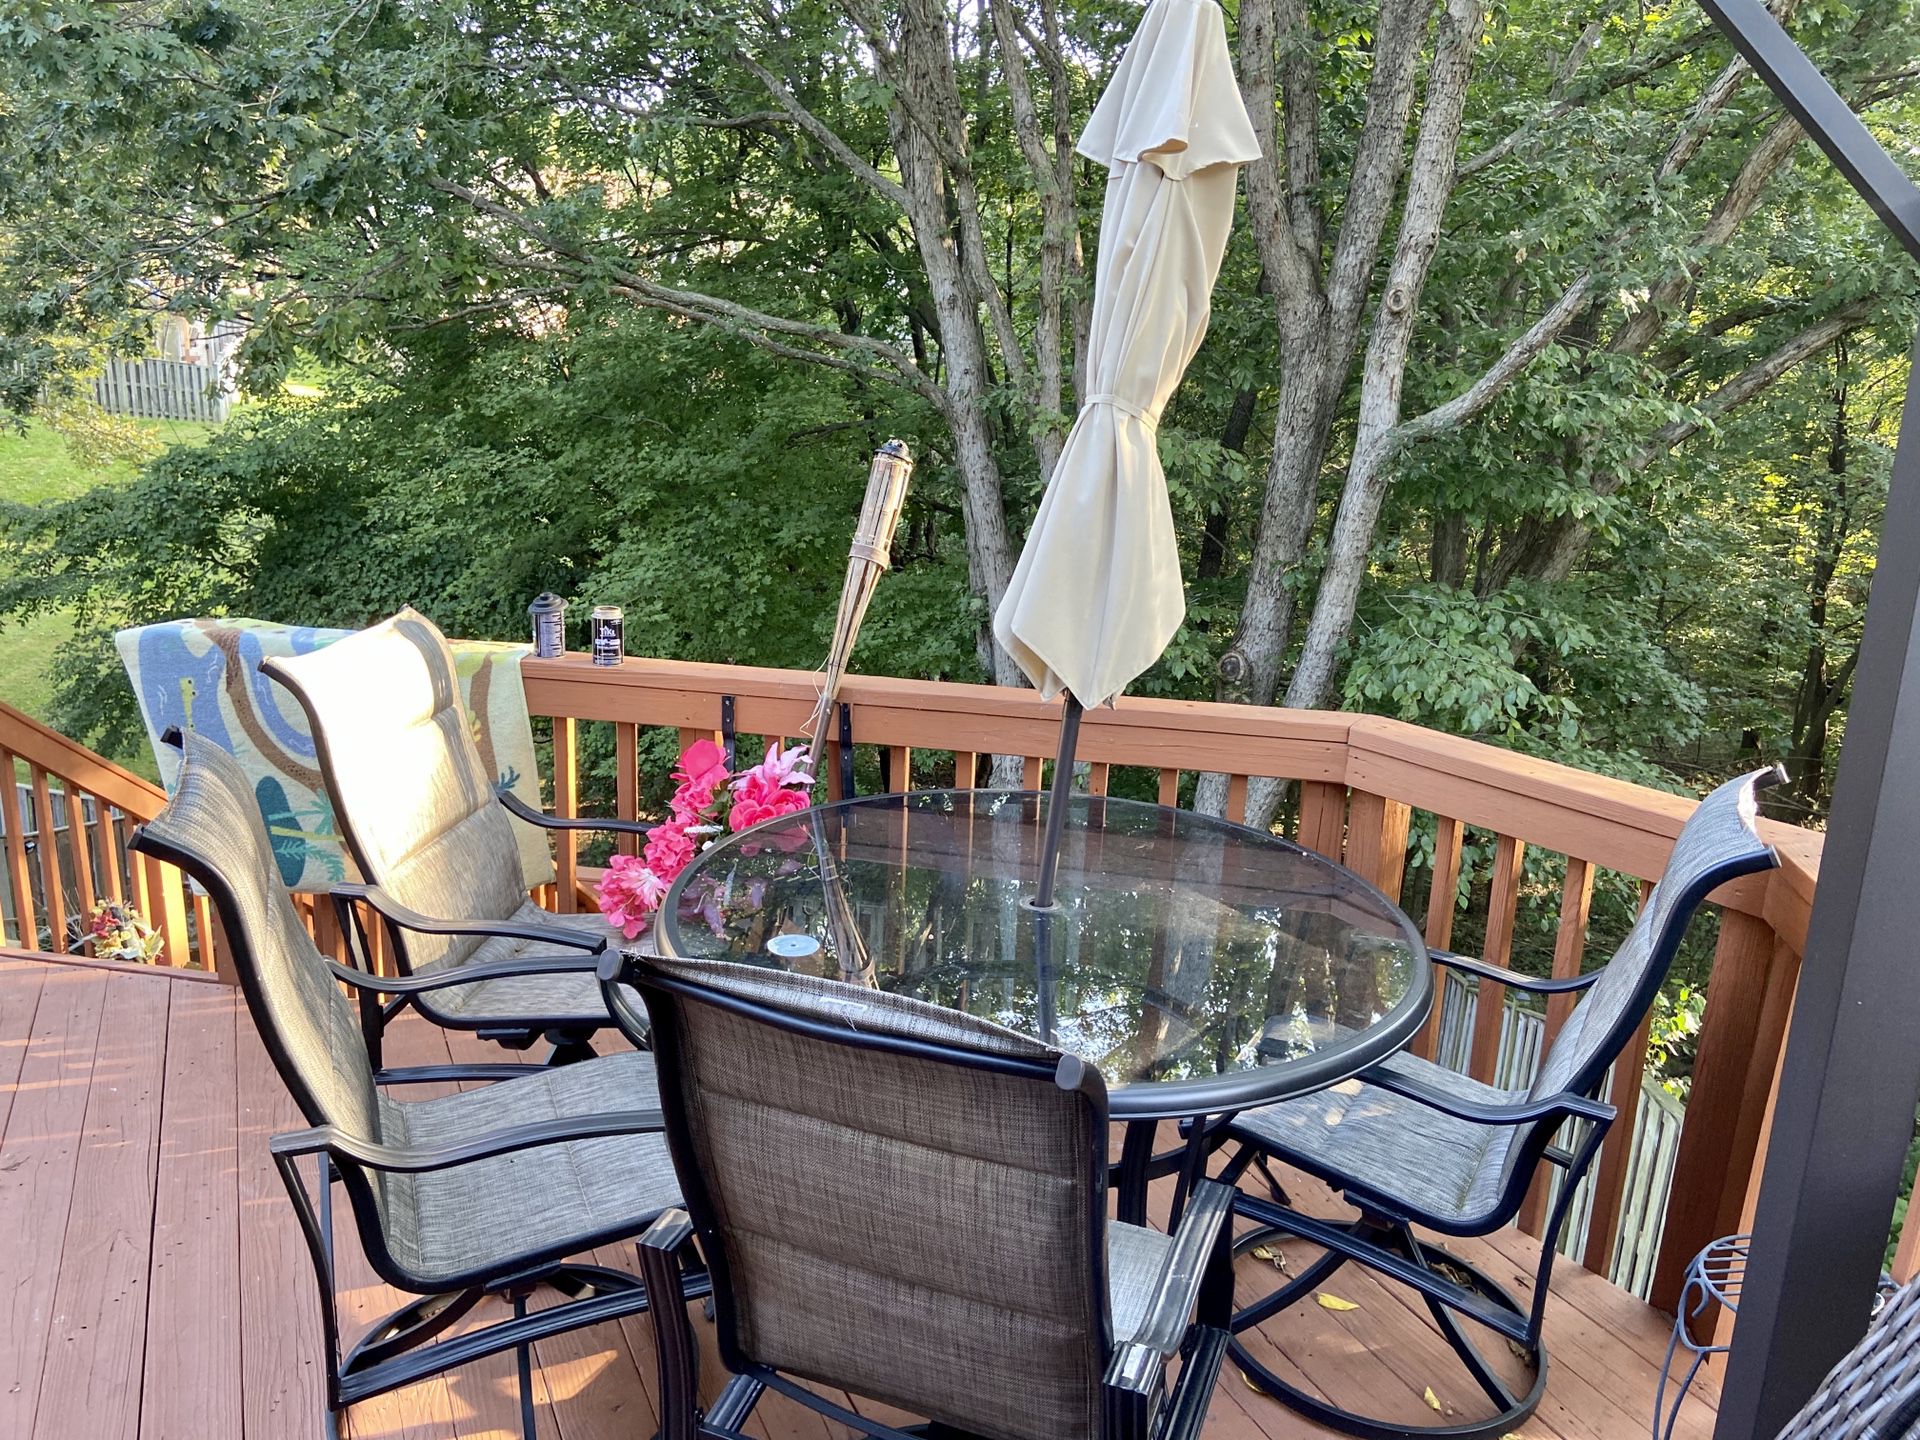 Patio furniture. Glass Top Patio Table with 4 chairs